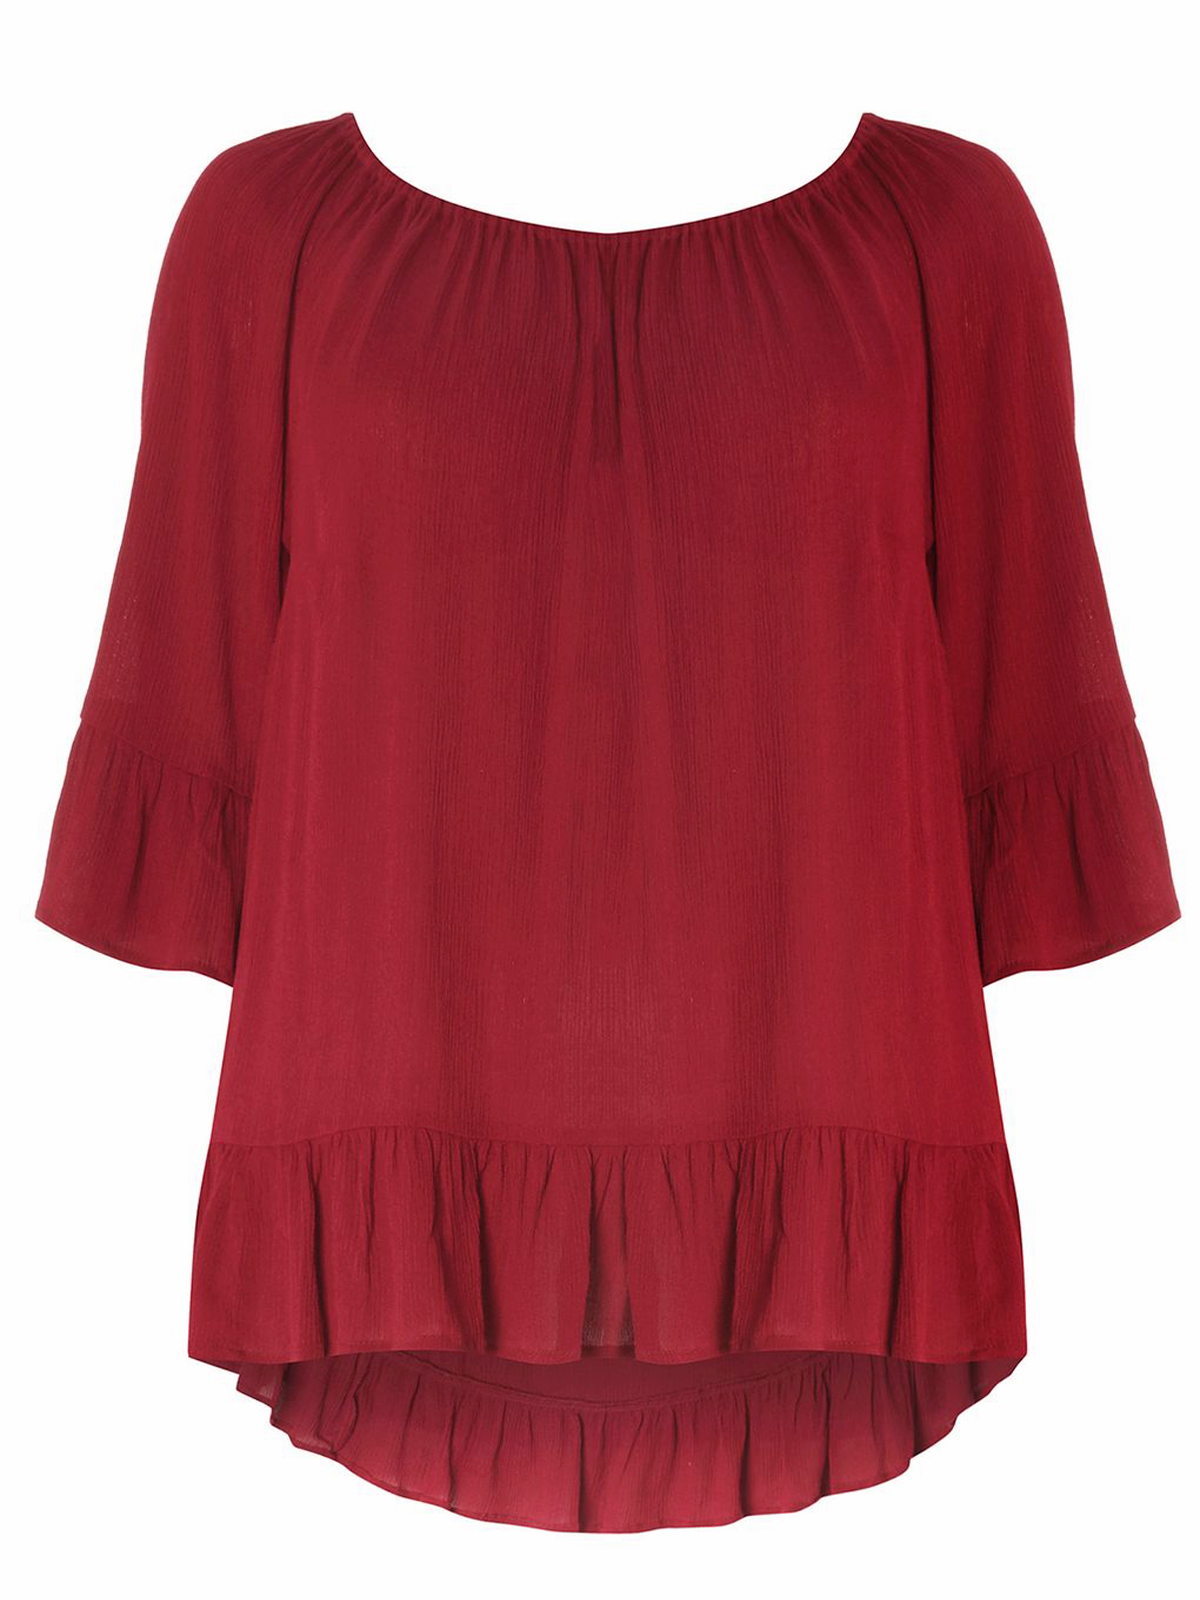 BURGUNDY Frill Sleeve Gypsy Top - Plus Size 16 to 30